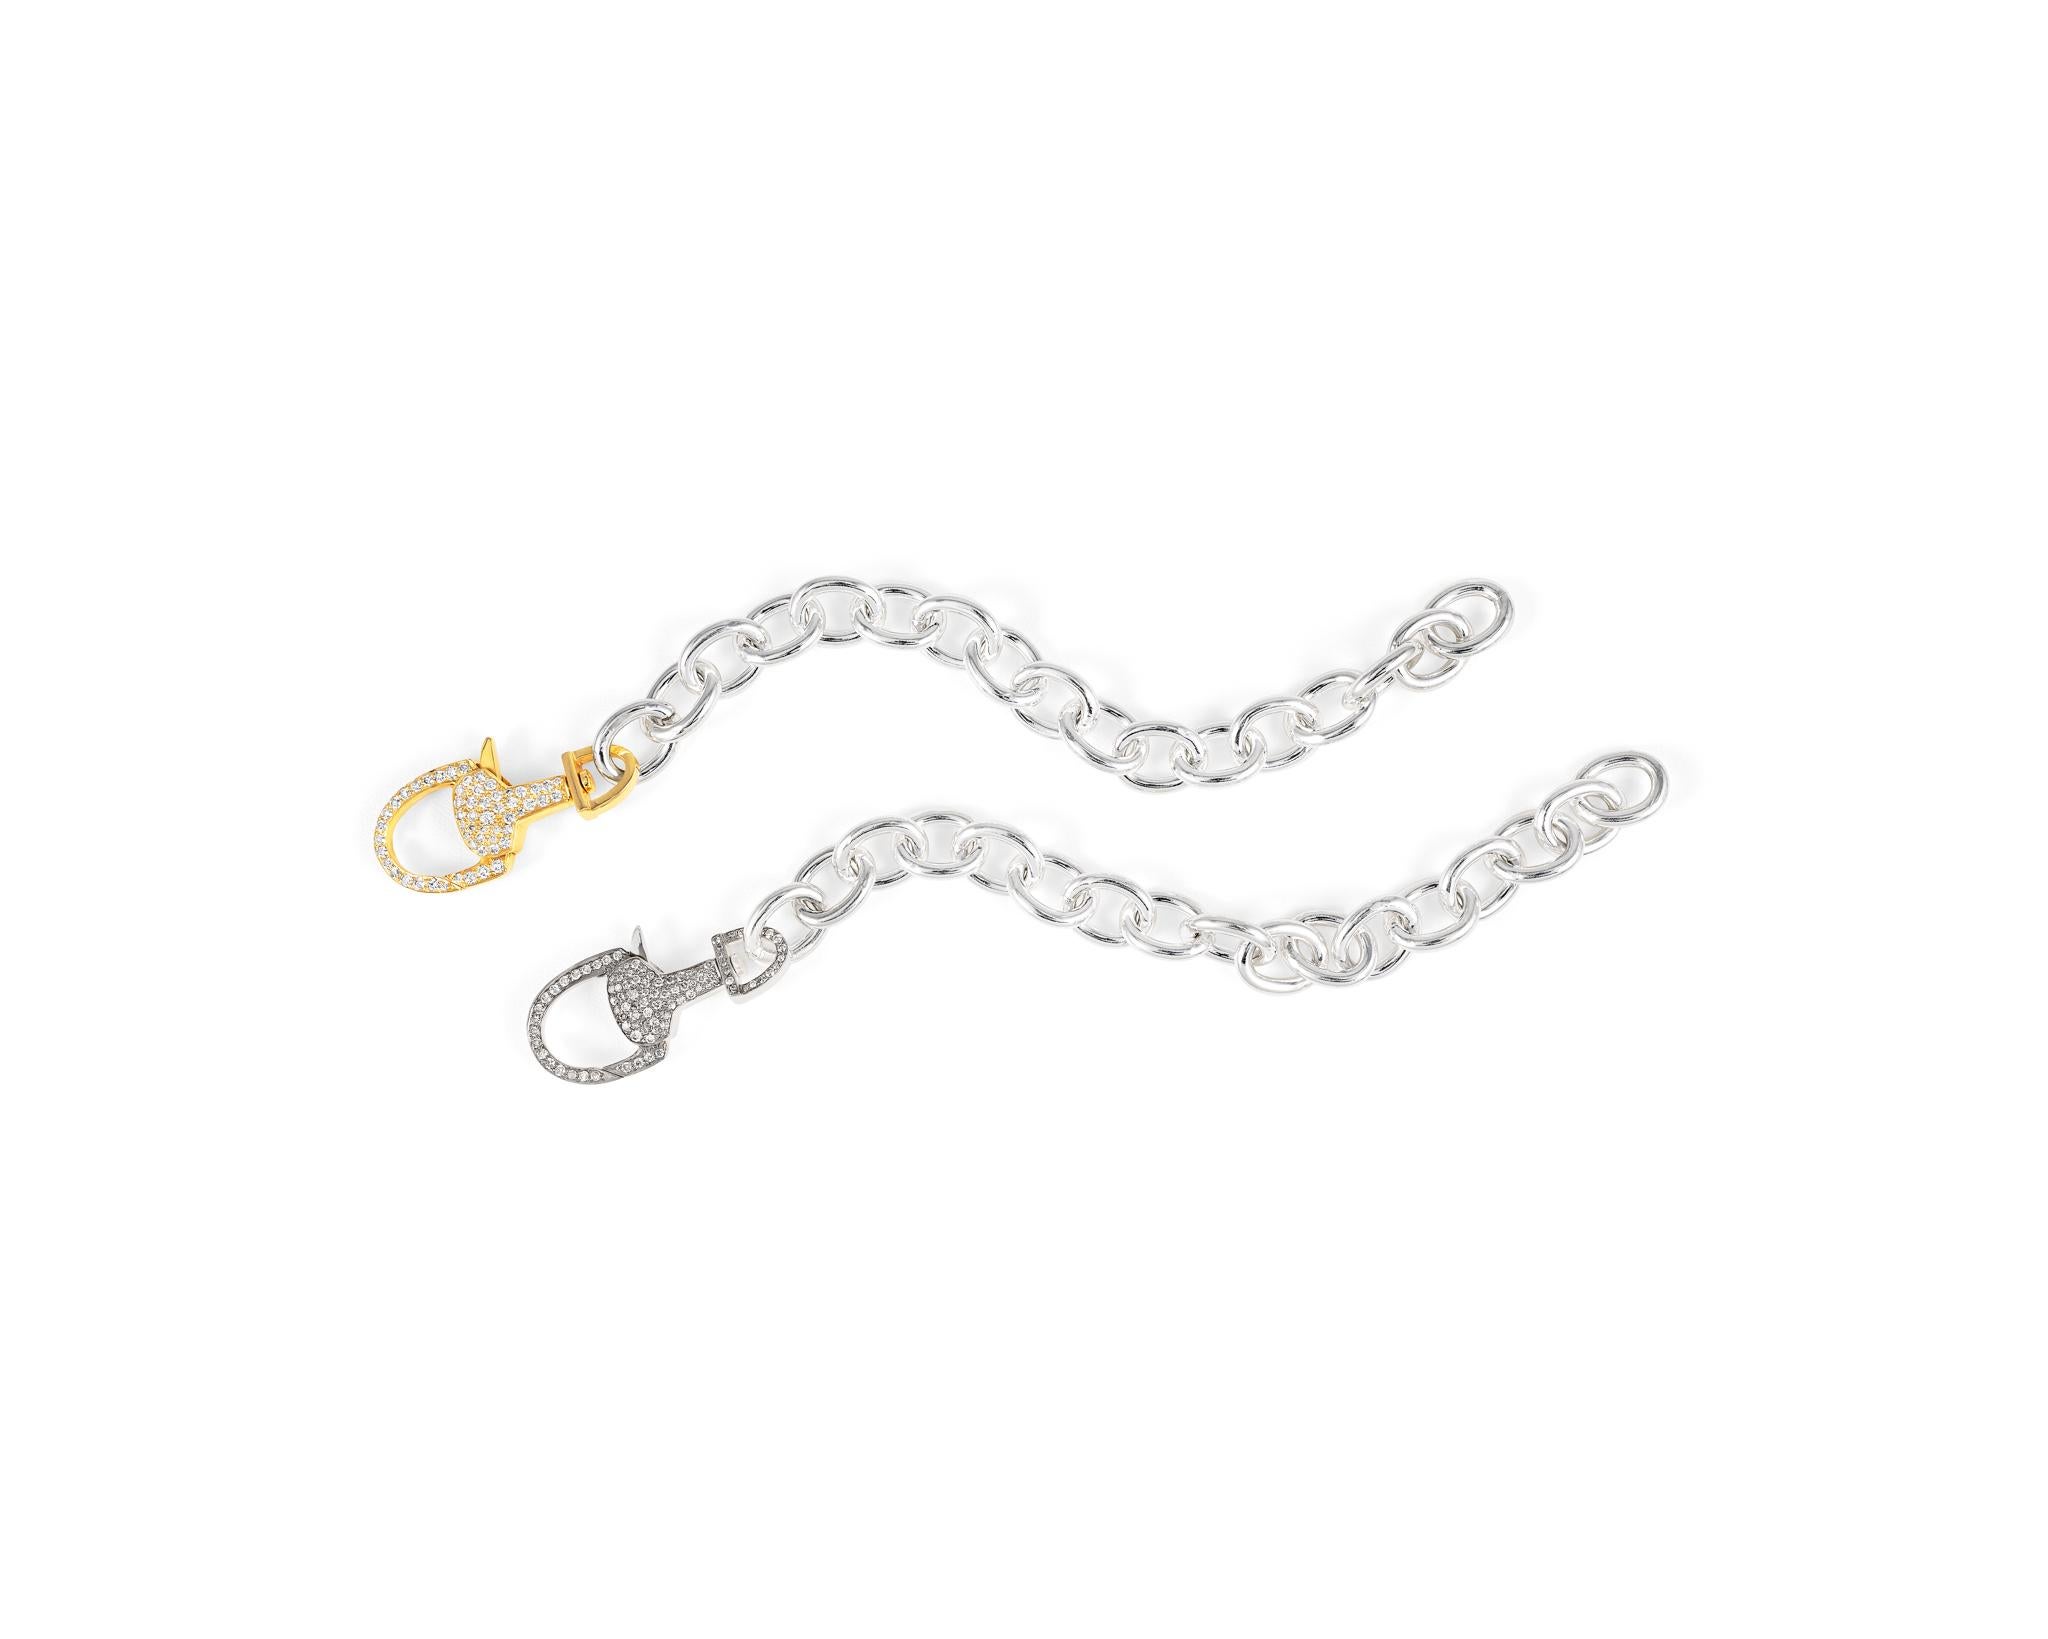 Part of the Vincent Peach Equestrian Collection, the Stirrup Lock Bracelet has a 14kt Yellow Gold Clasp with 1.15ct Diamonds on a 7